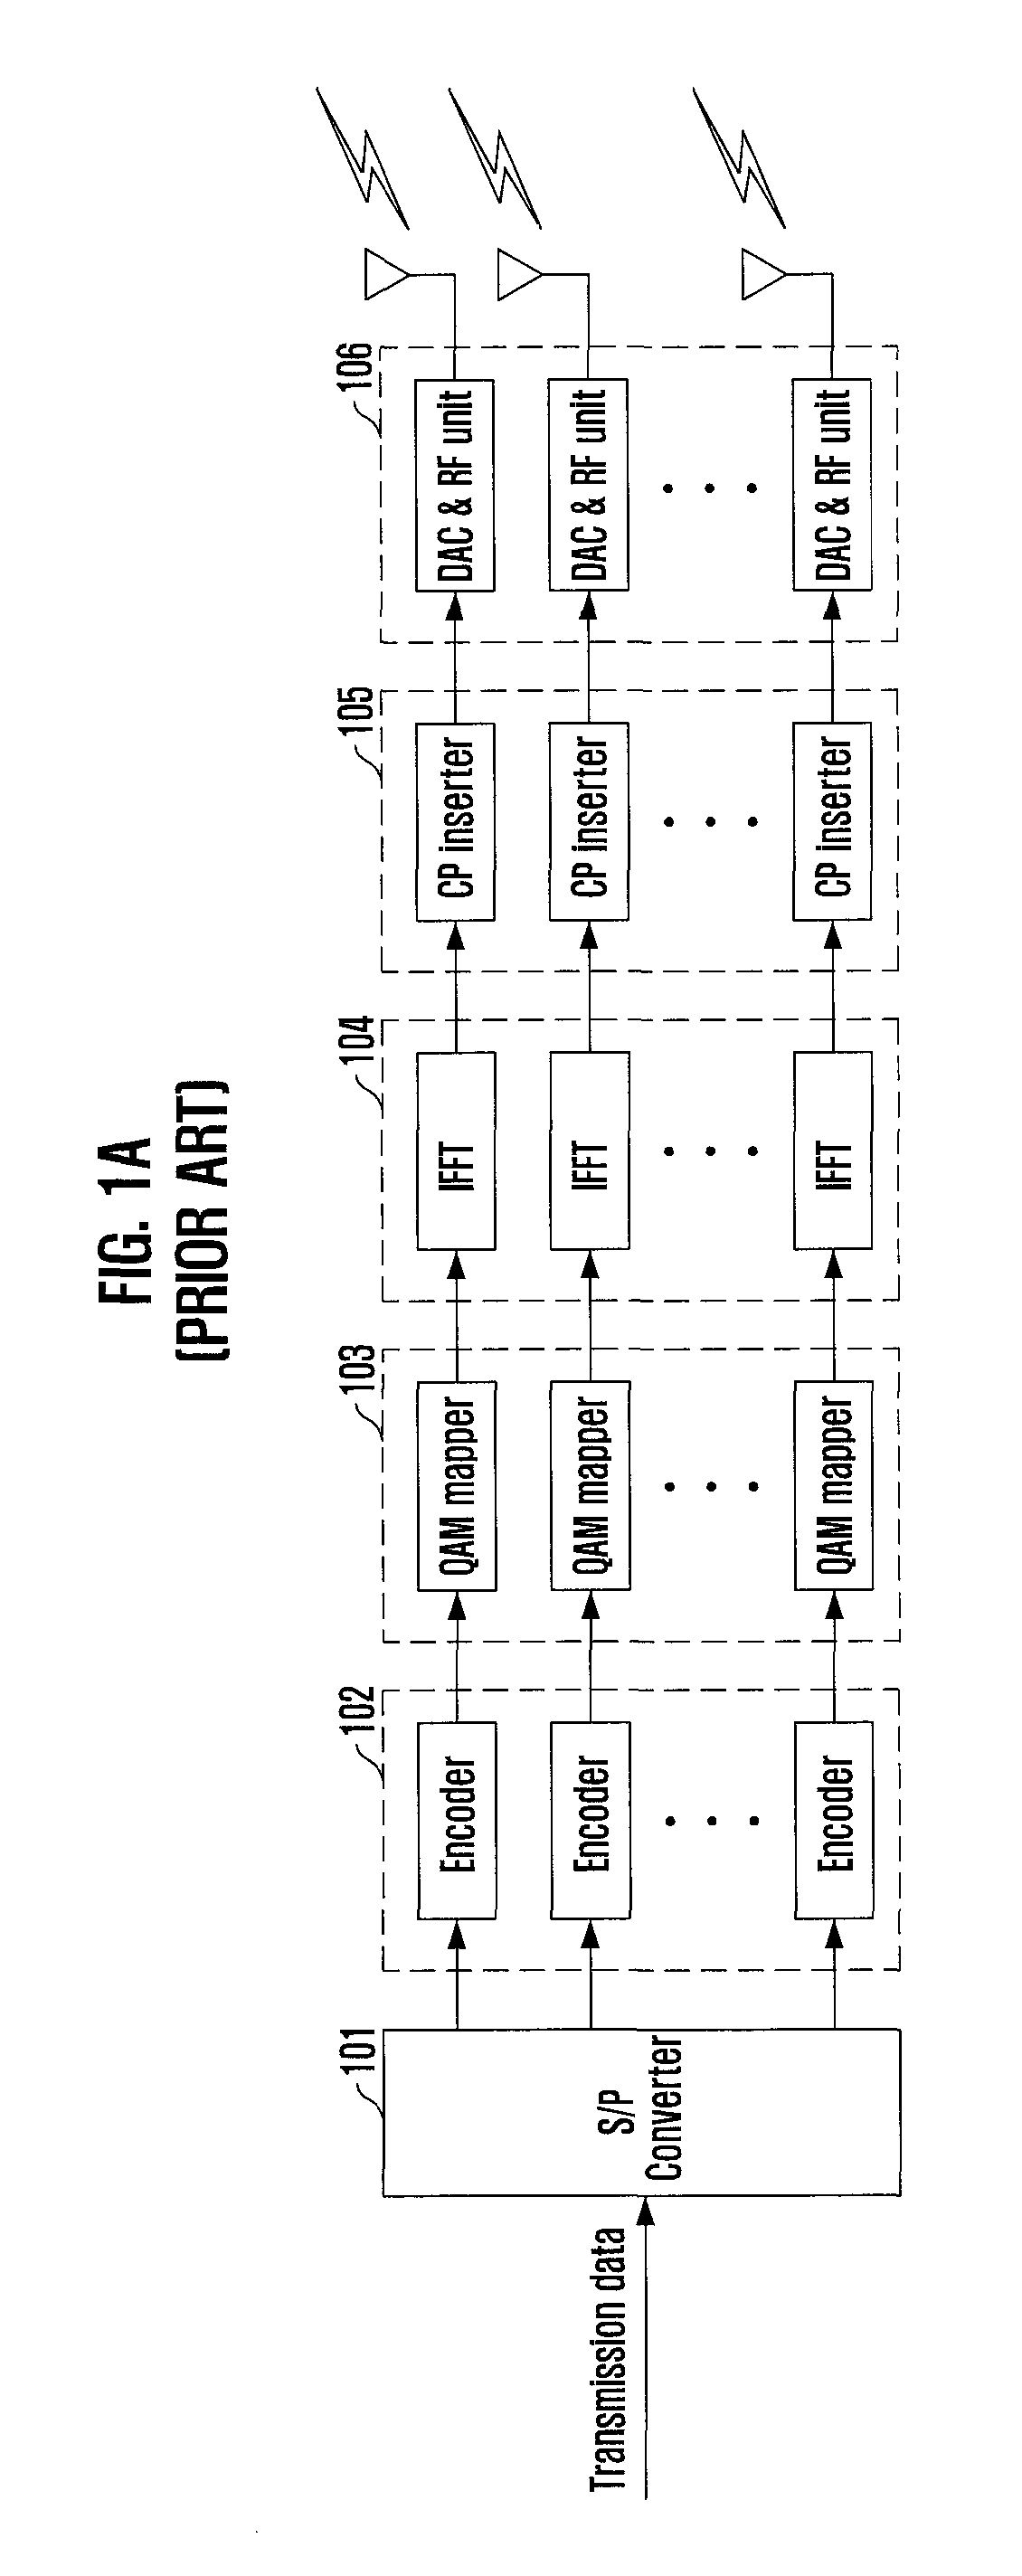 QR decomposition apparatus and method for MIMO system